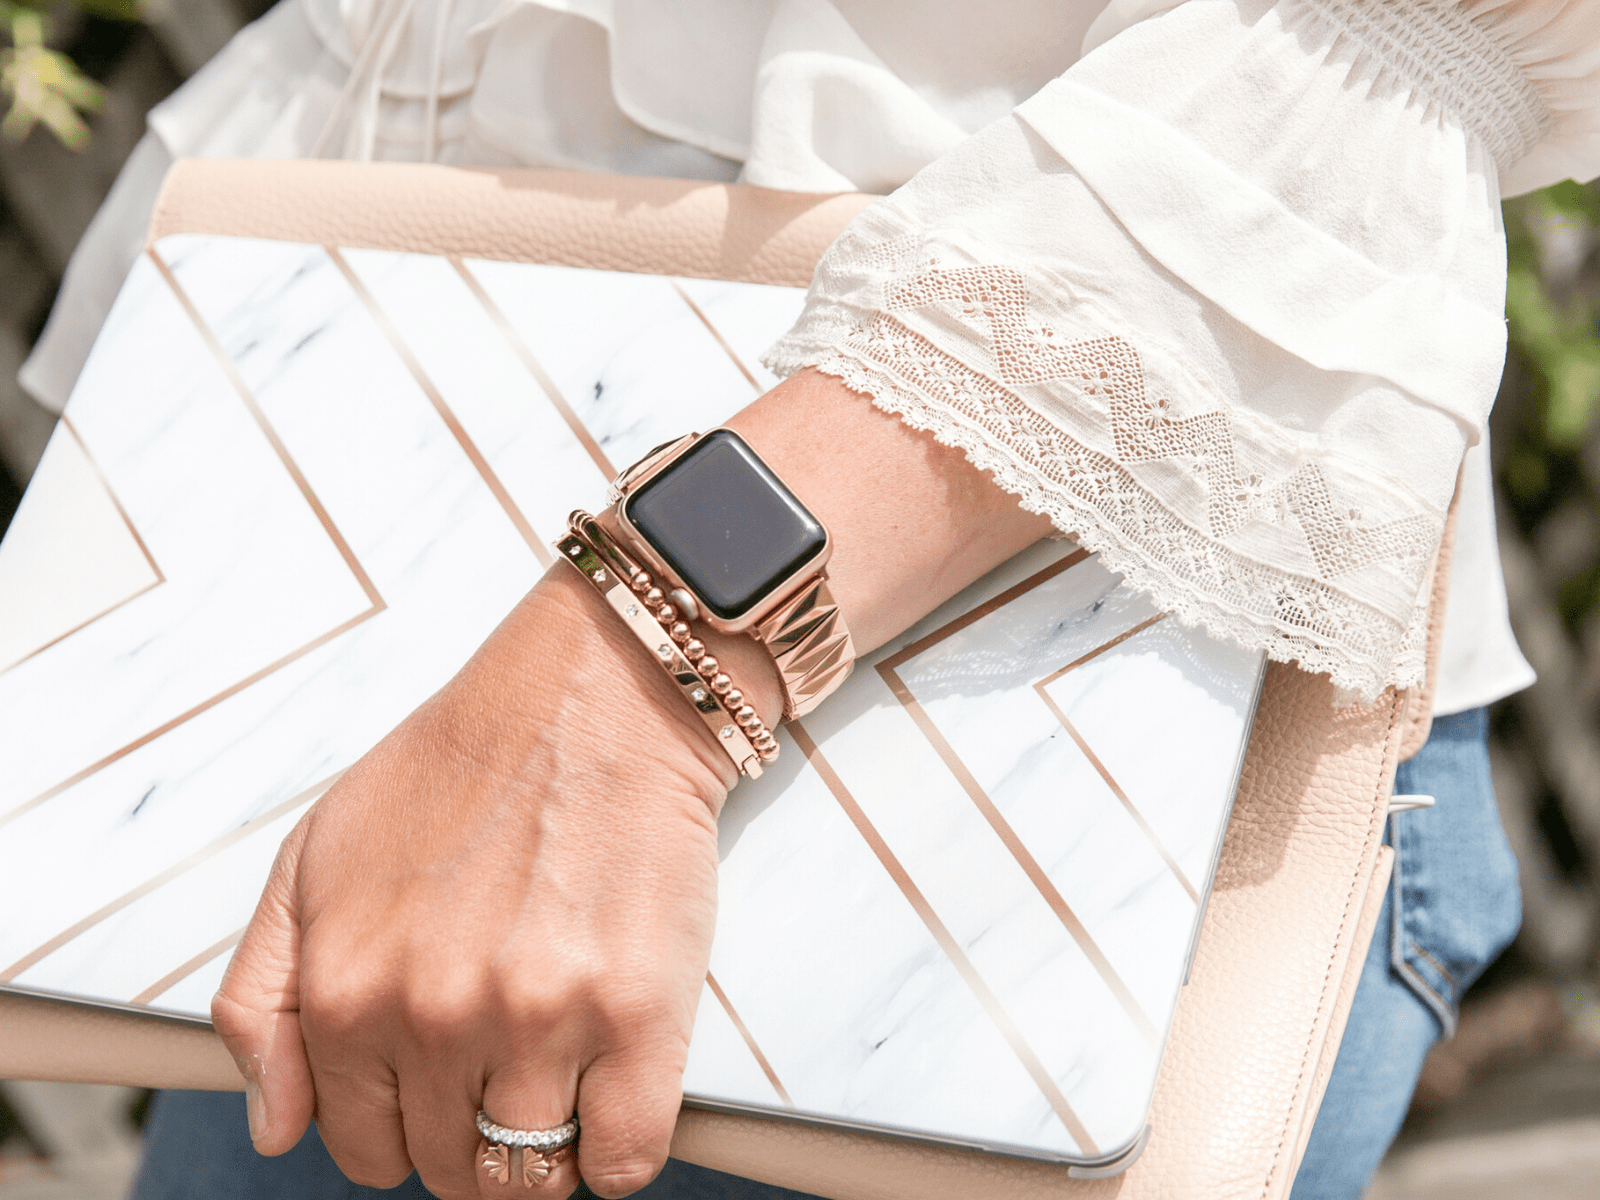 Pyramid Band for the Apple Watch - Goldenerre Women's Apple Watch Bands and Jewelry